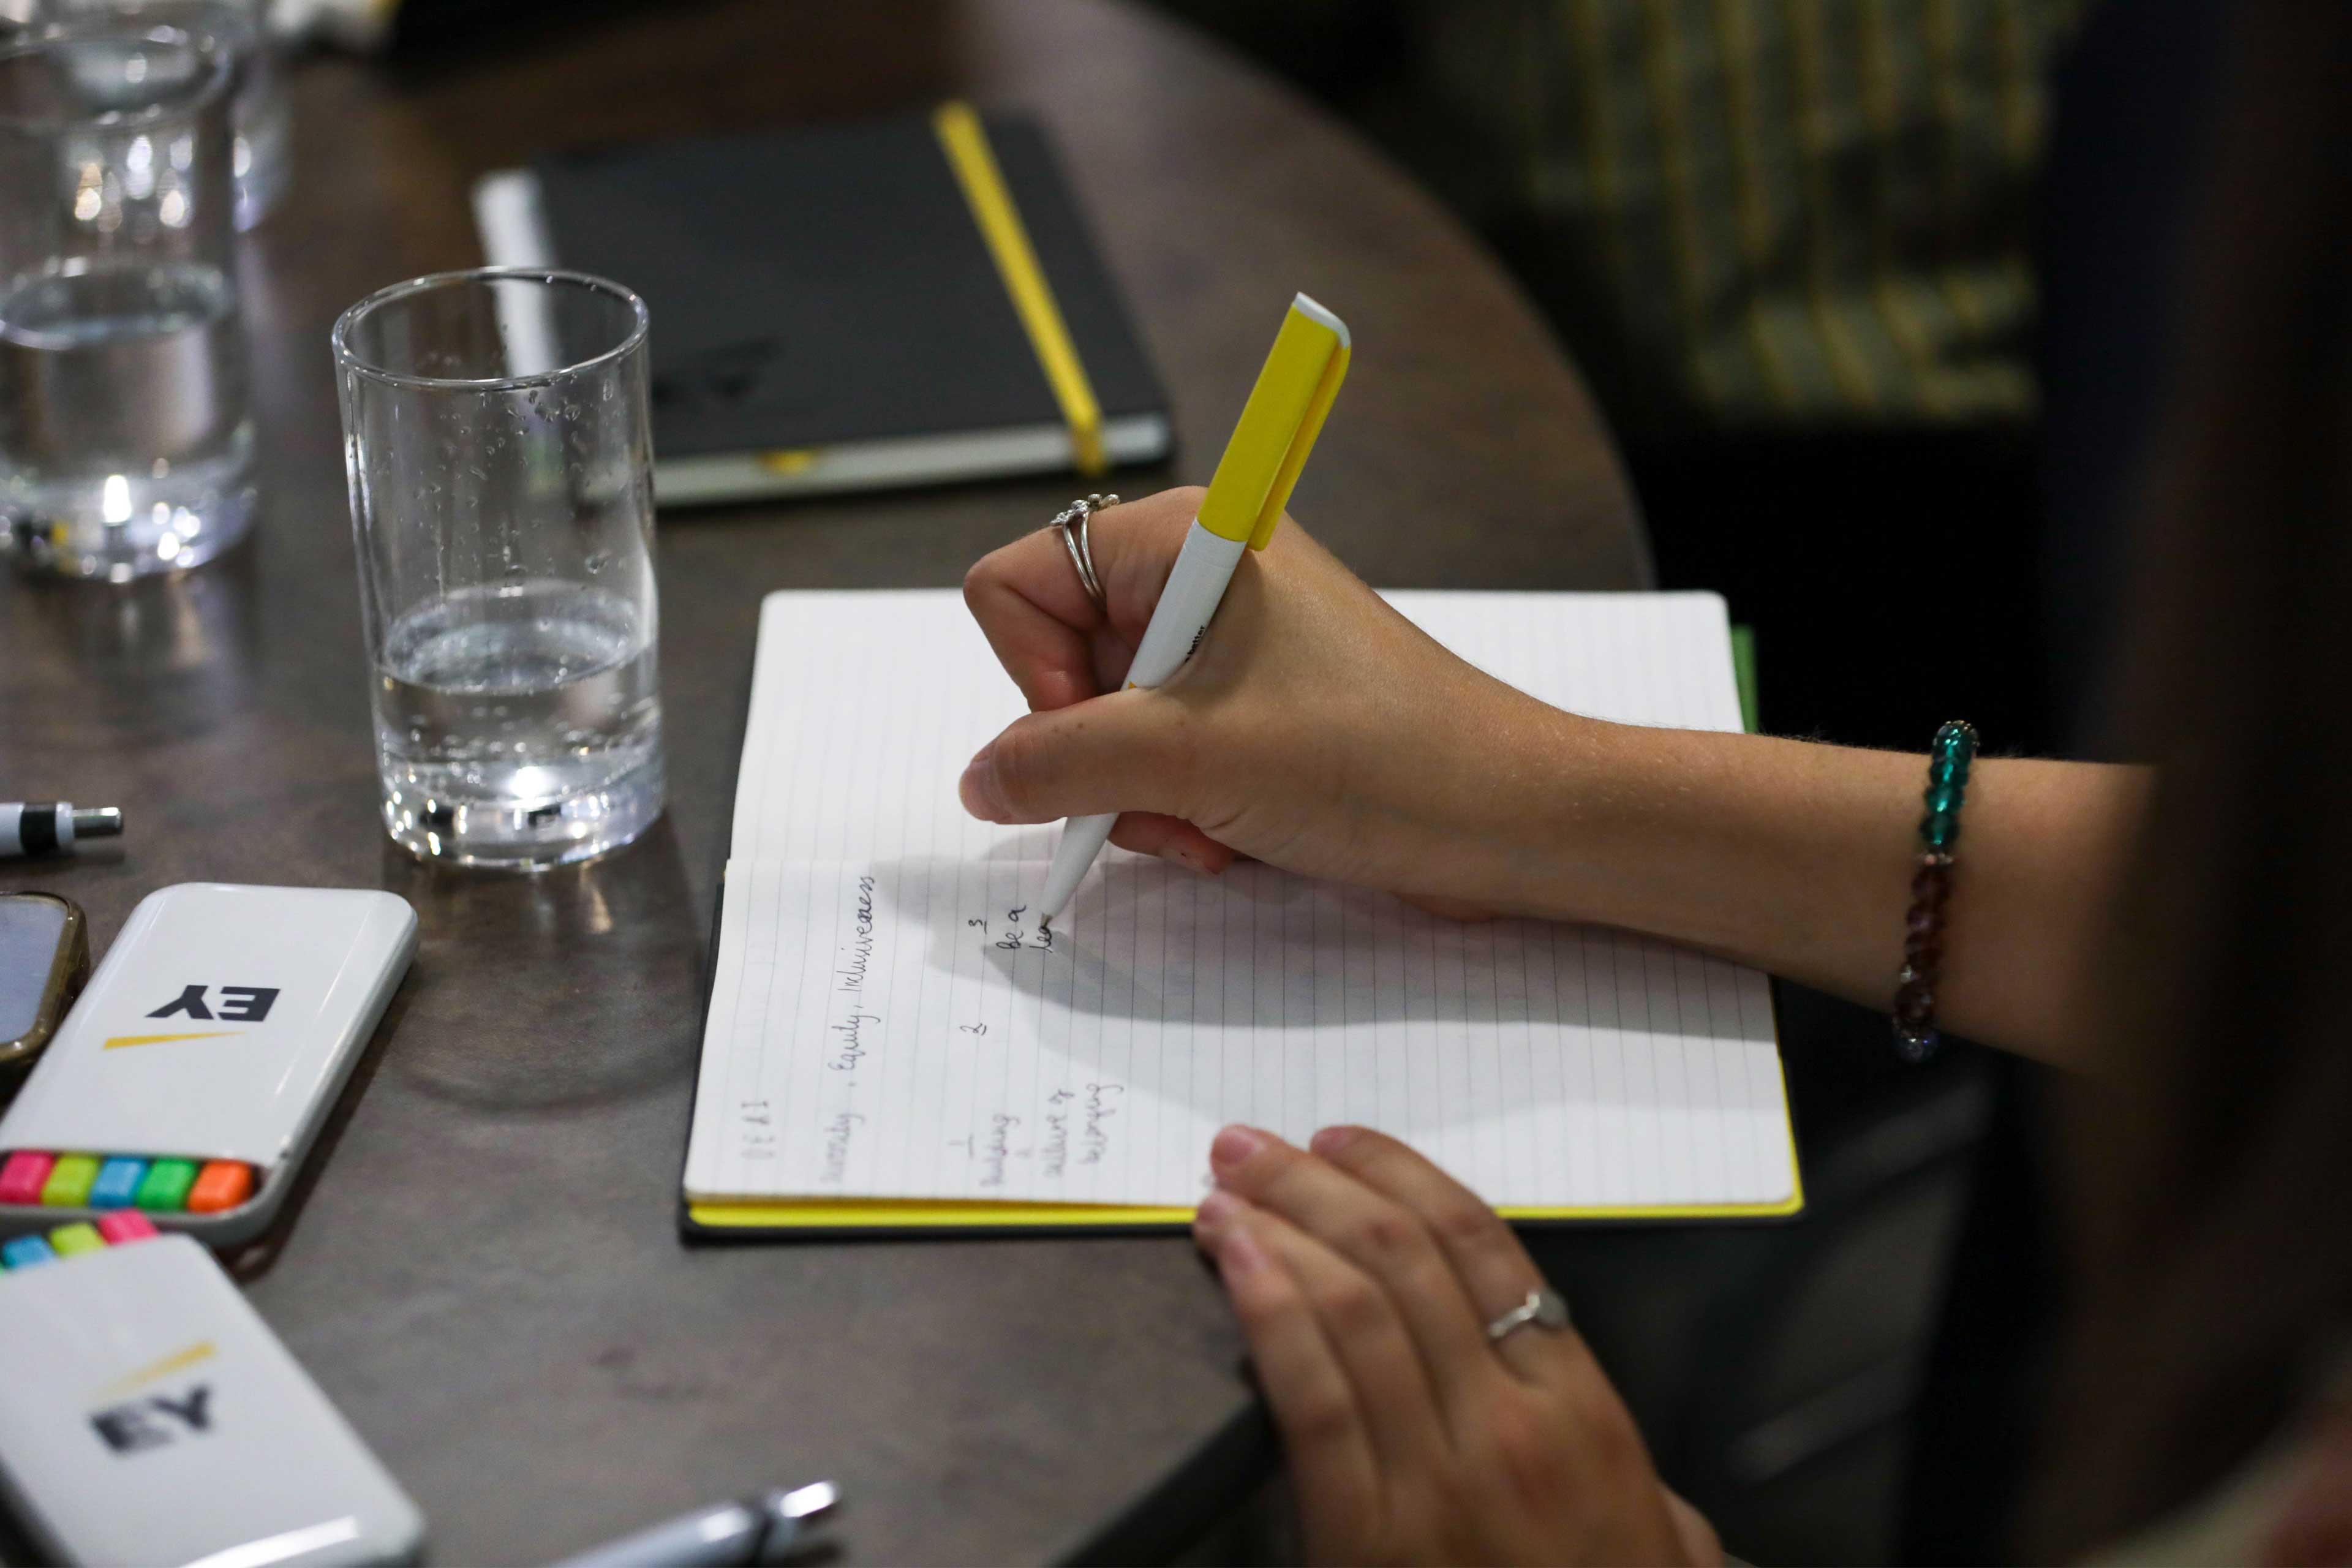 Student writing in a notebook at an event